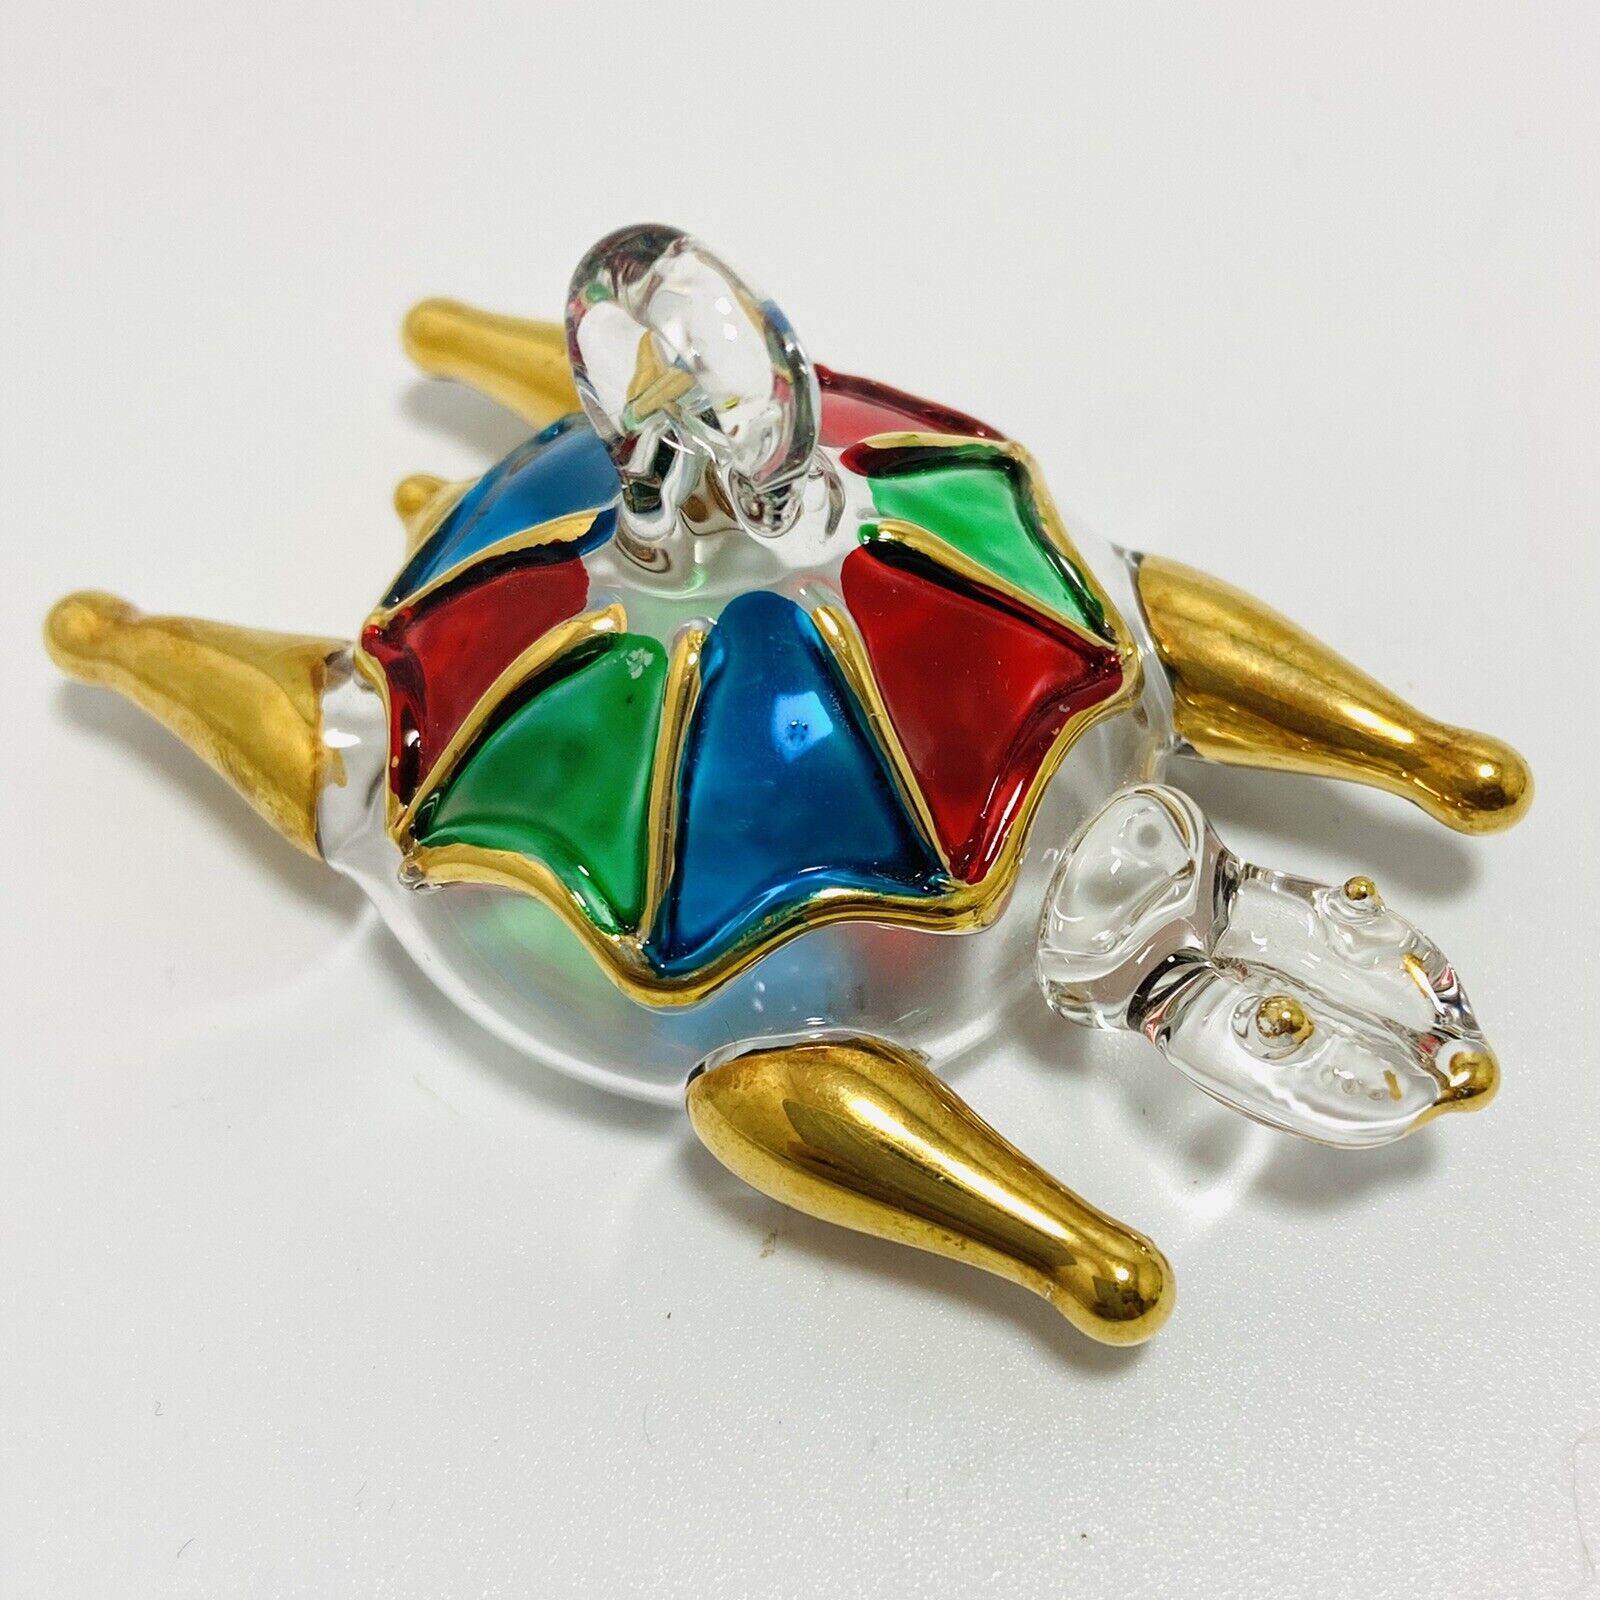 Art Glass Turtle Blue Red Green Gold Ornament Pendent Charm Amphibian 3.25”